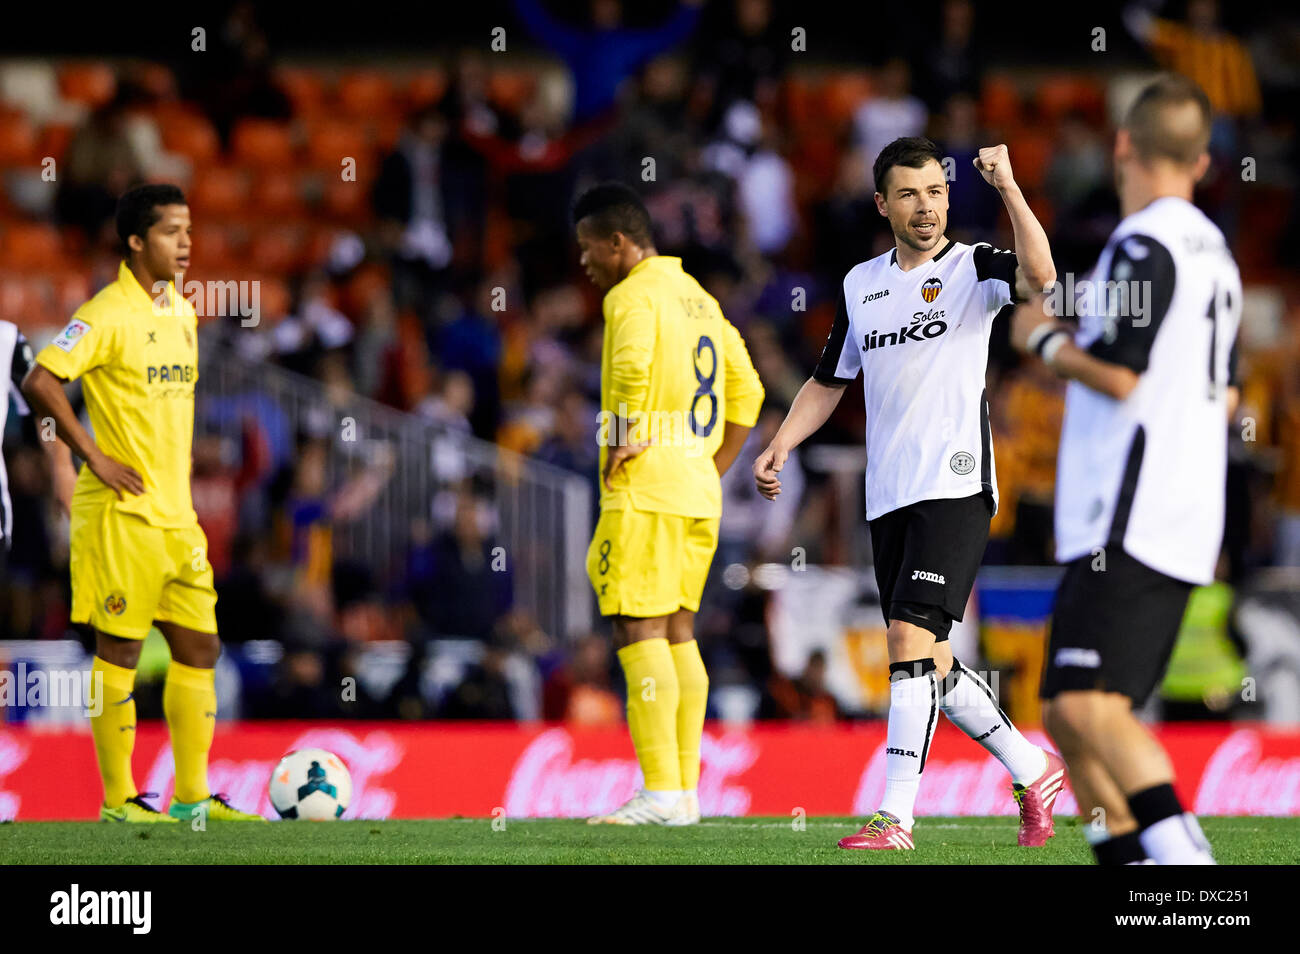 Valencia, Spain. 23rd Mar, 2014. Forward Javi Fuego of Valencia CF (2nd R) celebrates after scoring the first goal for his team during the La Liga Game between Valencia CF and Villarreal at Mestalla Stadium, Valencia © Action Plus Sports/Alamy Live News Stock Photo